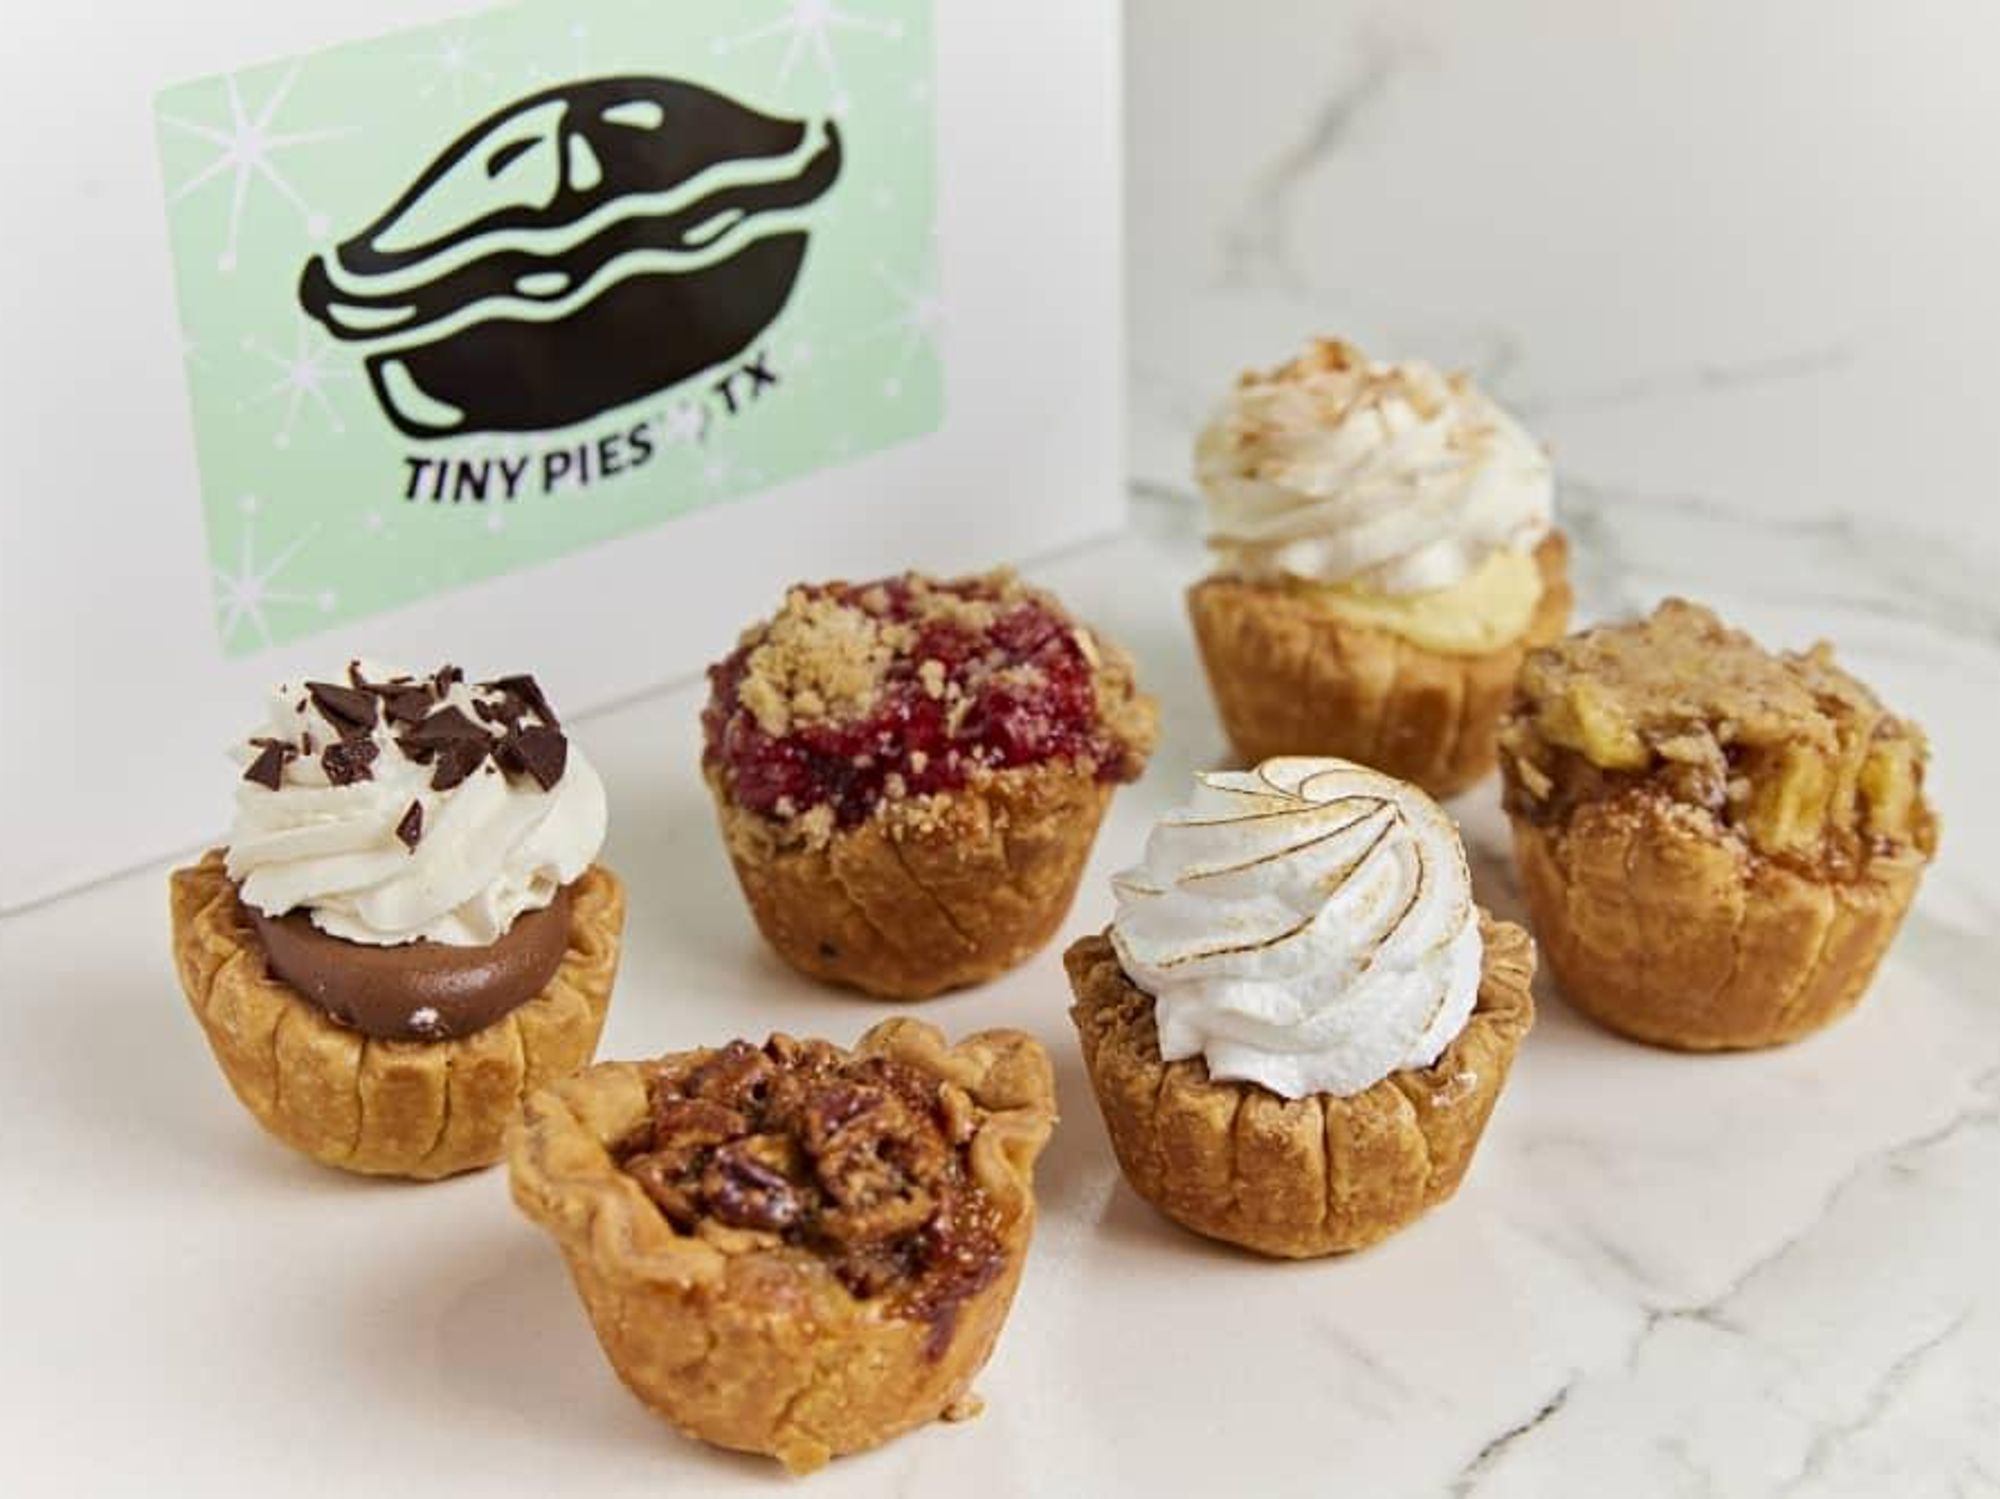 Six pies by Tiny Pies.